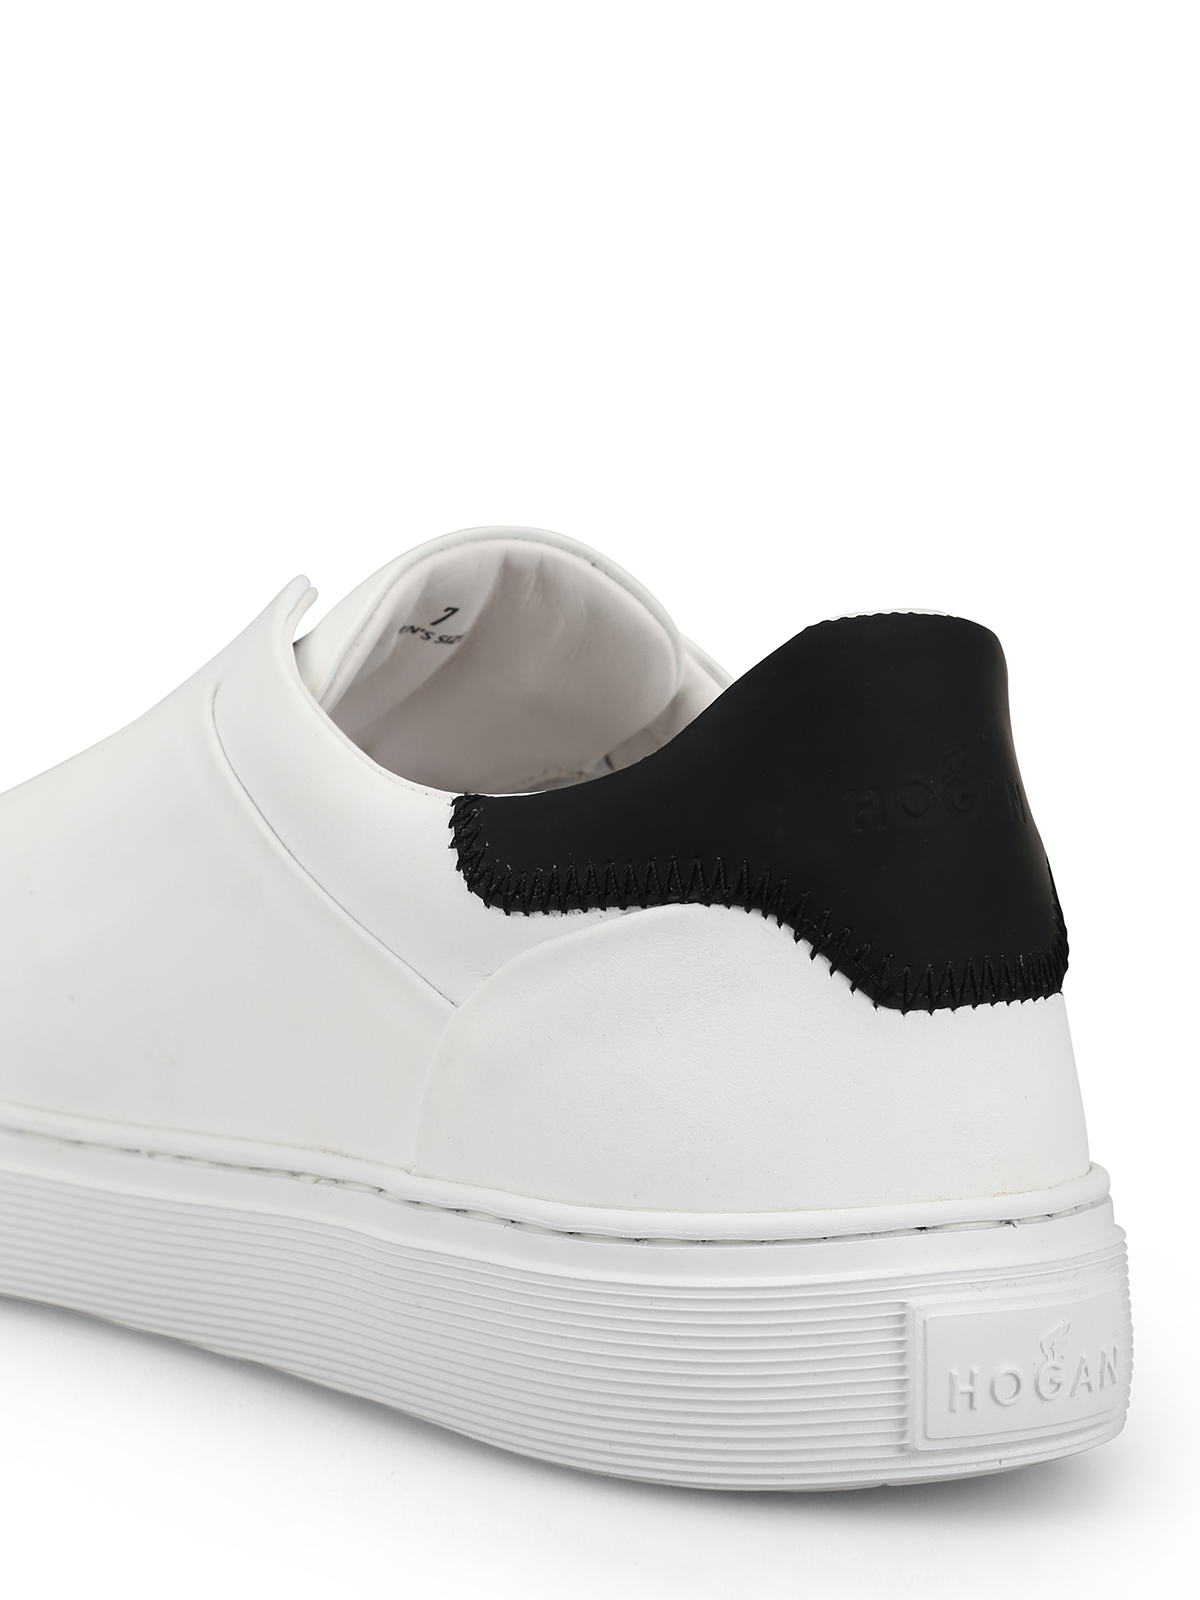 white leather slip on trainers